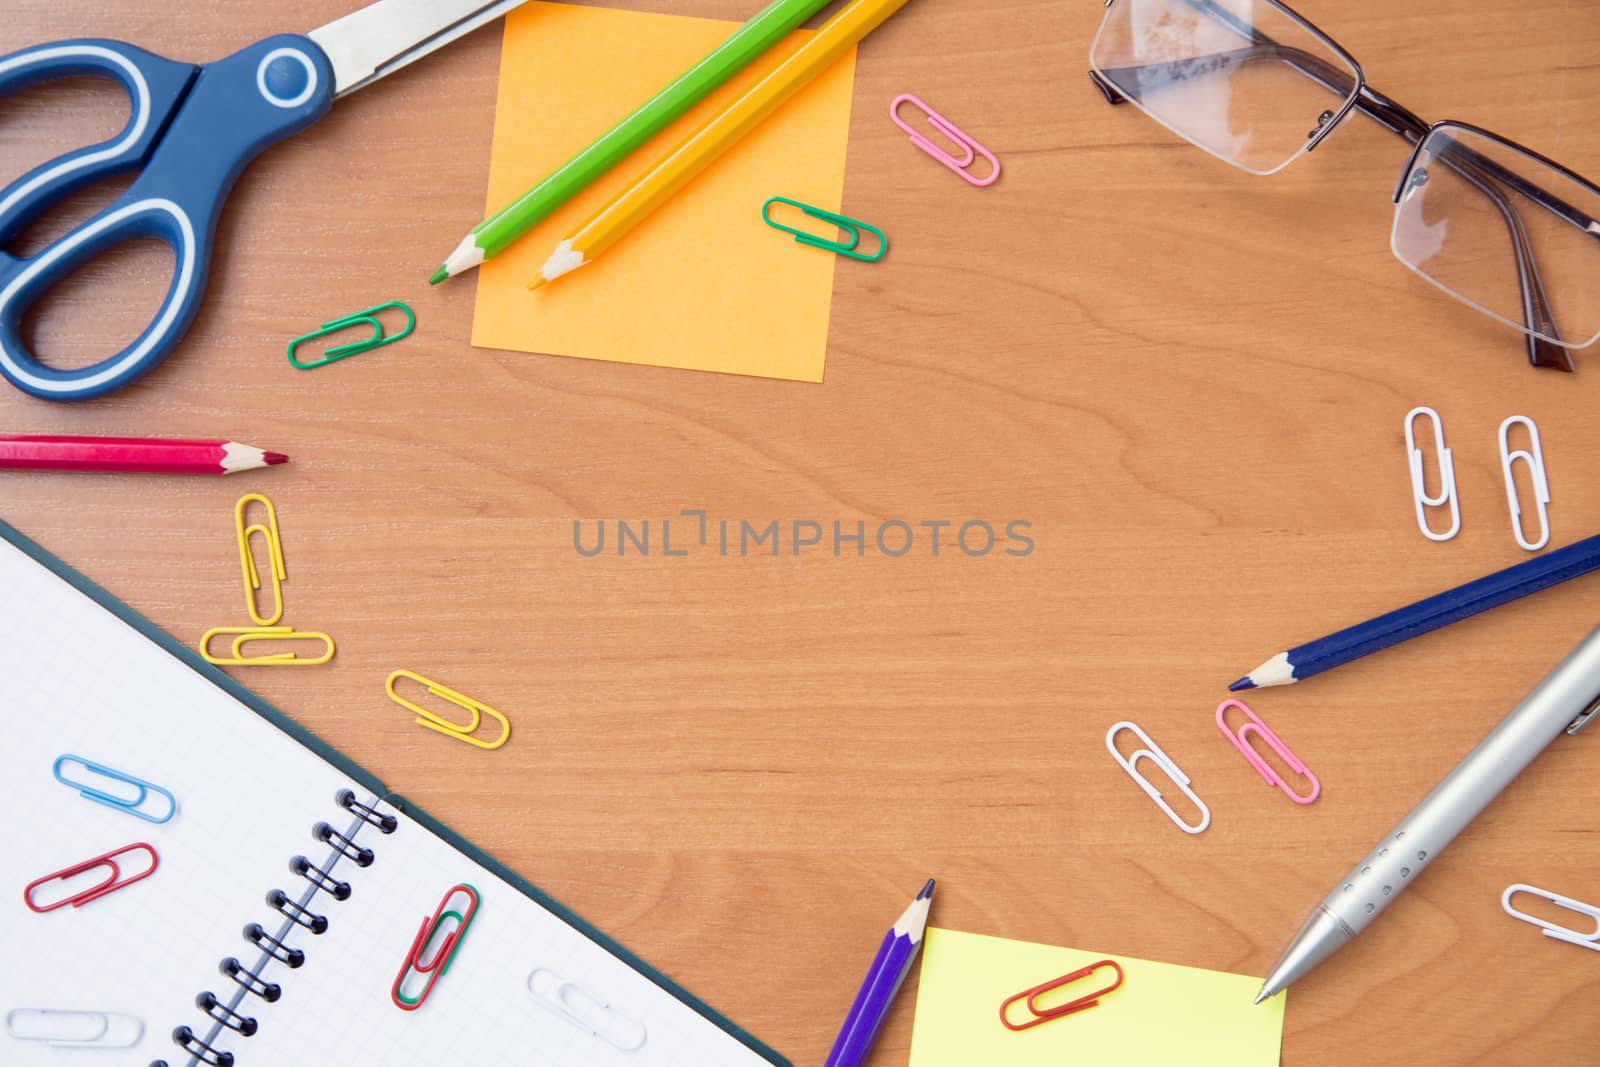 scissors, glasses, paper clips, pen, pencil,notebook on wooden surface